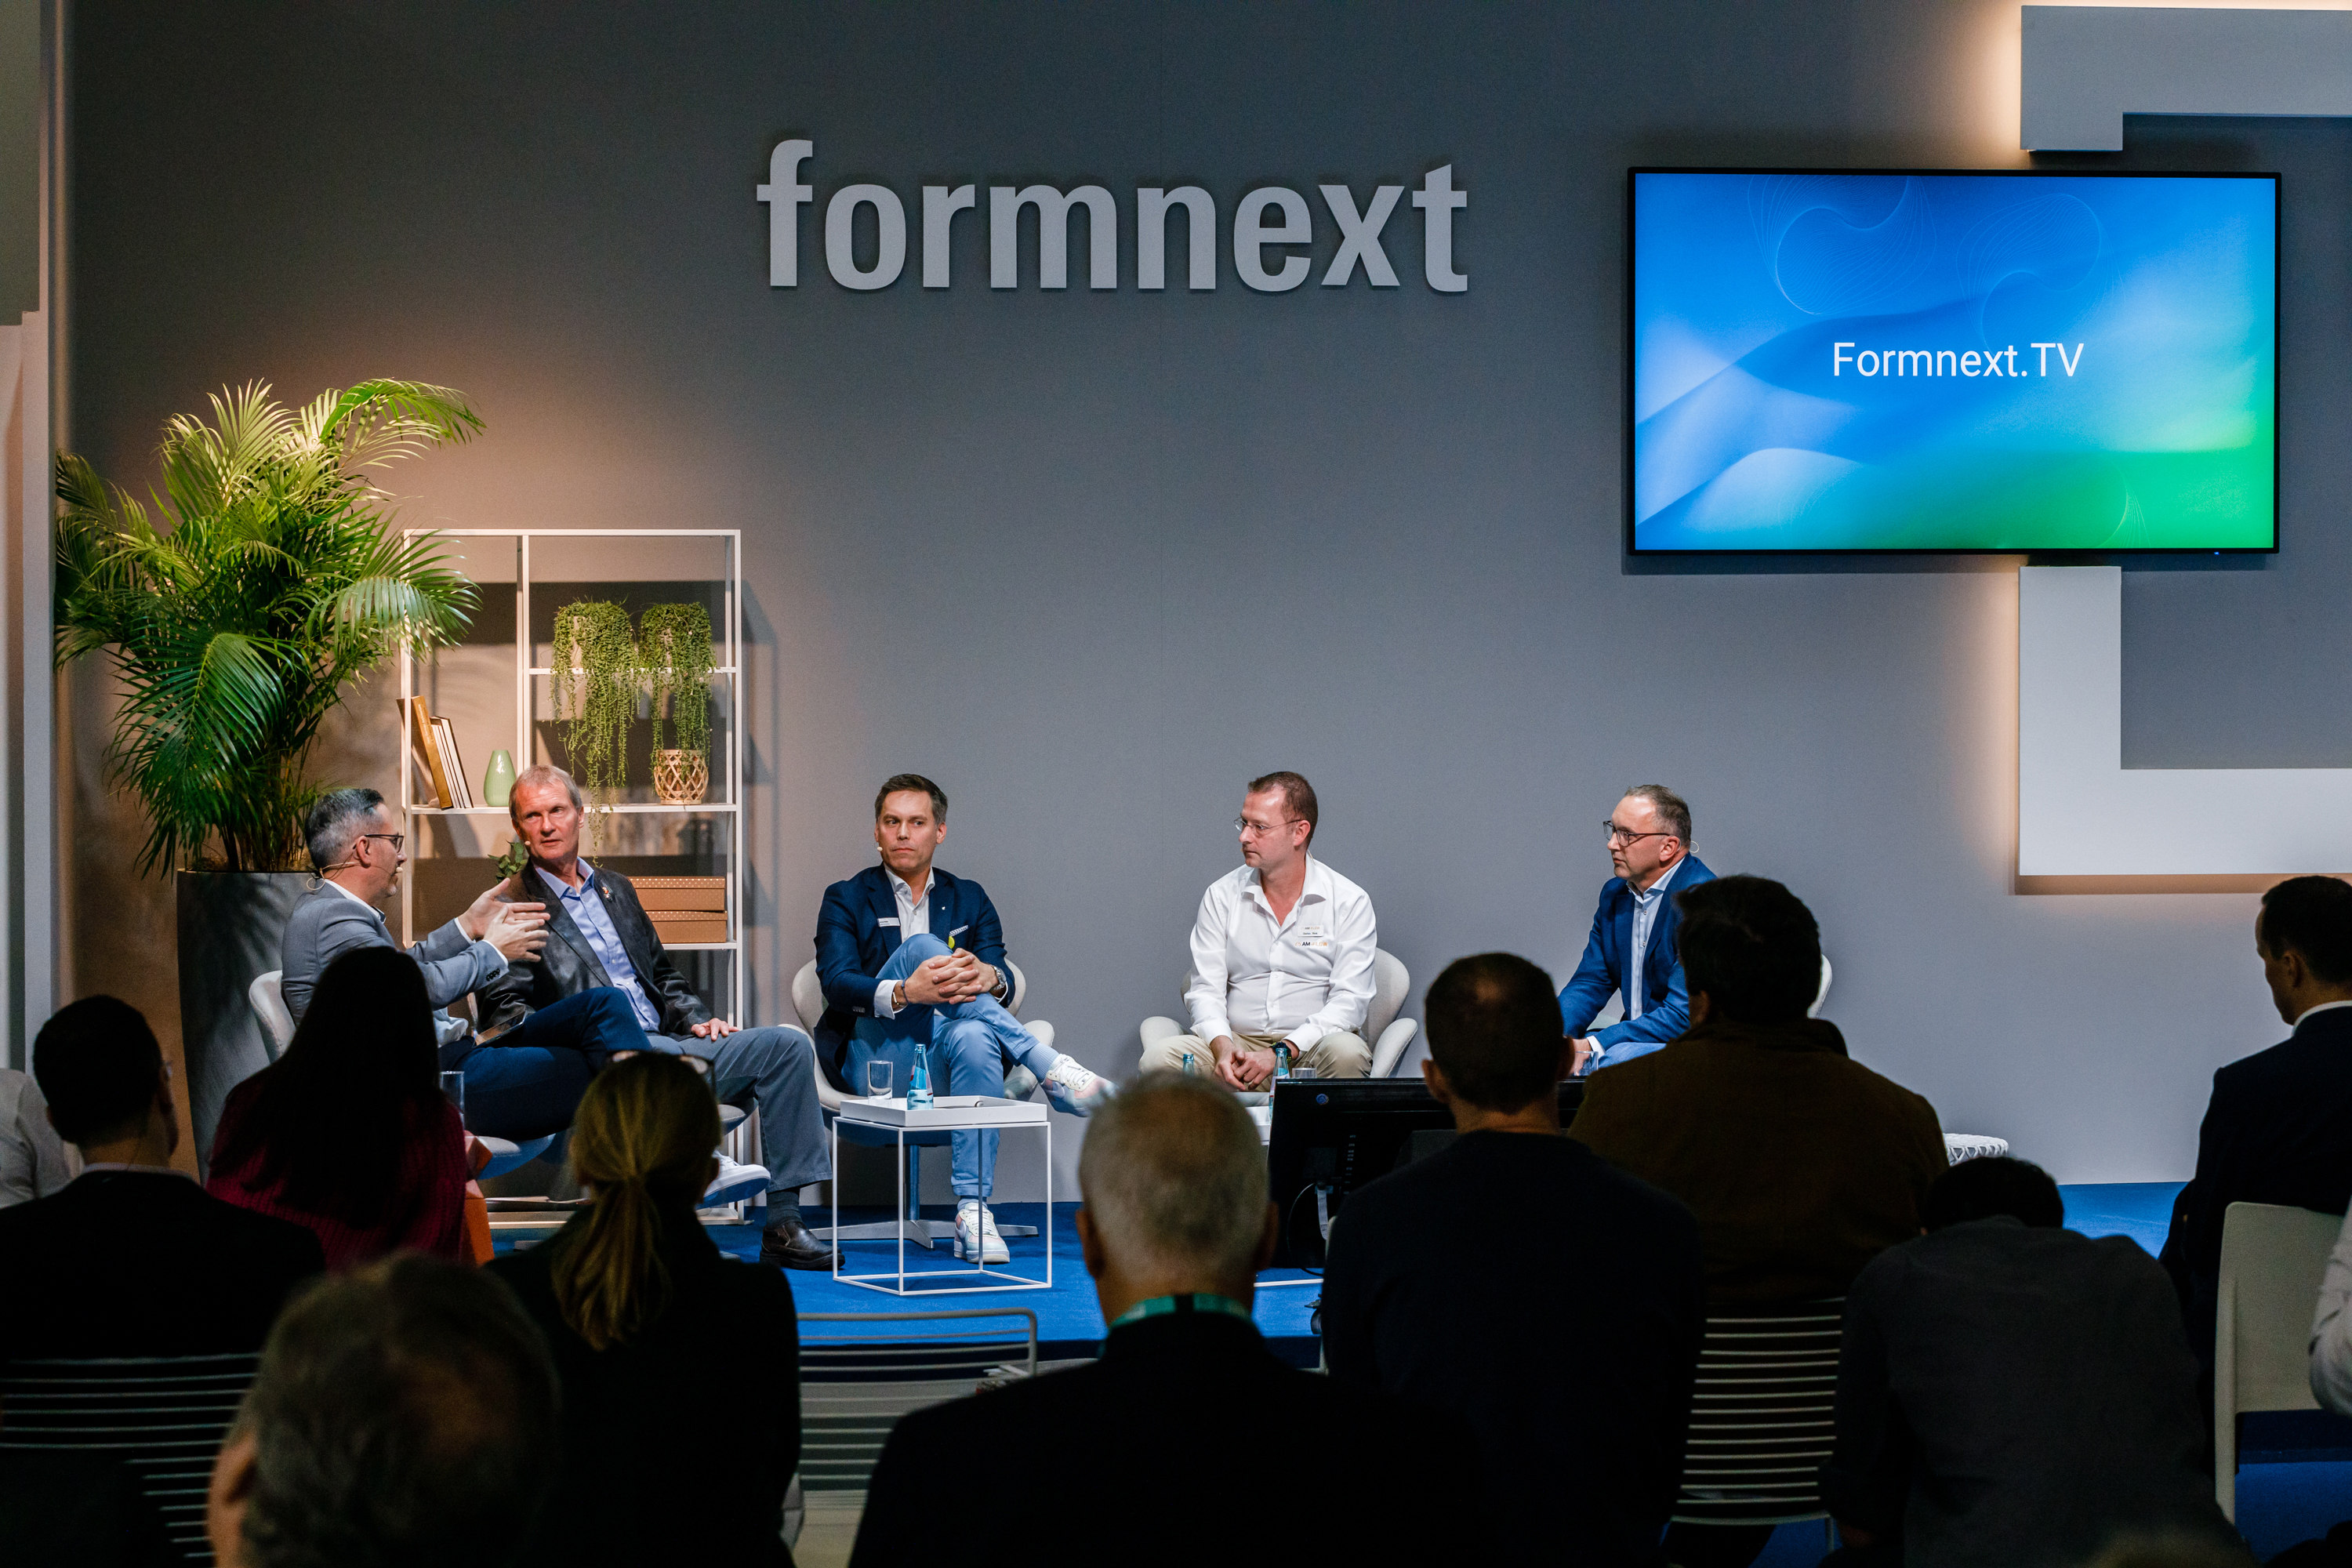 The winners of the Formnext Start-up Challenge can participate in a pitch event on the Industry Stage to be broadcast live on Formnext.TV. (Image: Mesago Messe Frankfurt/Marc Jacquemin)